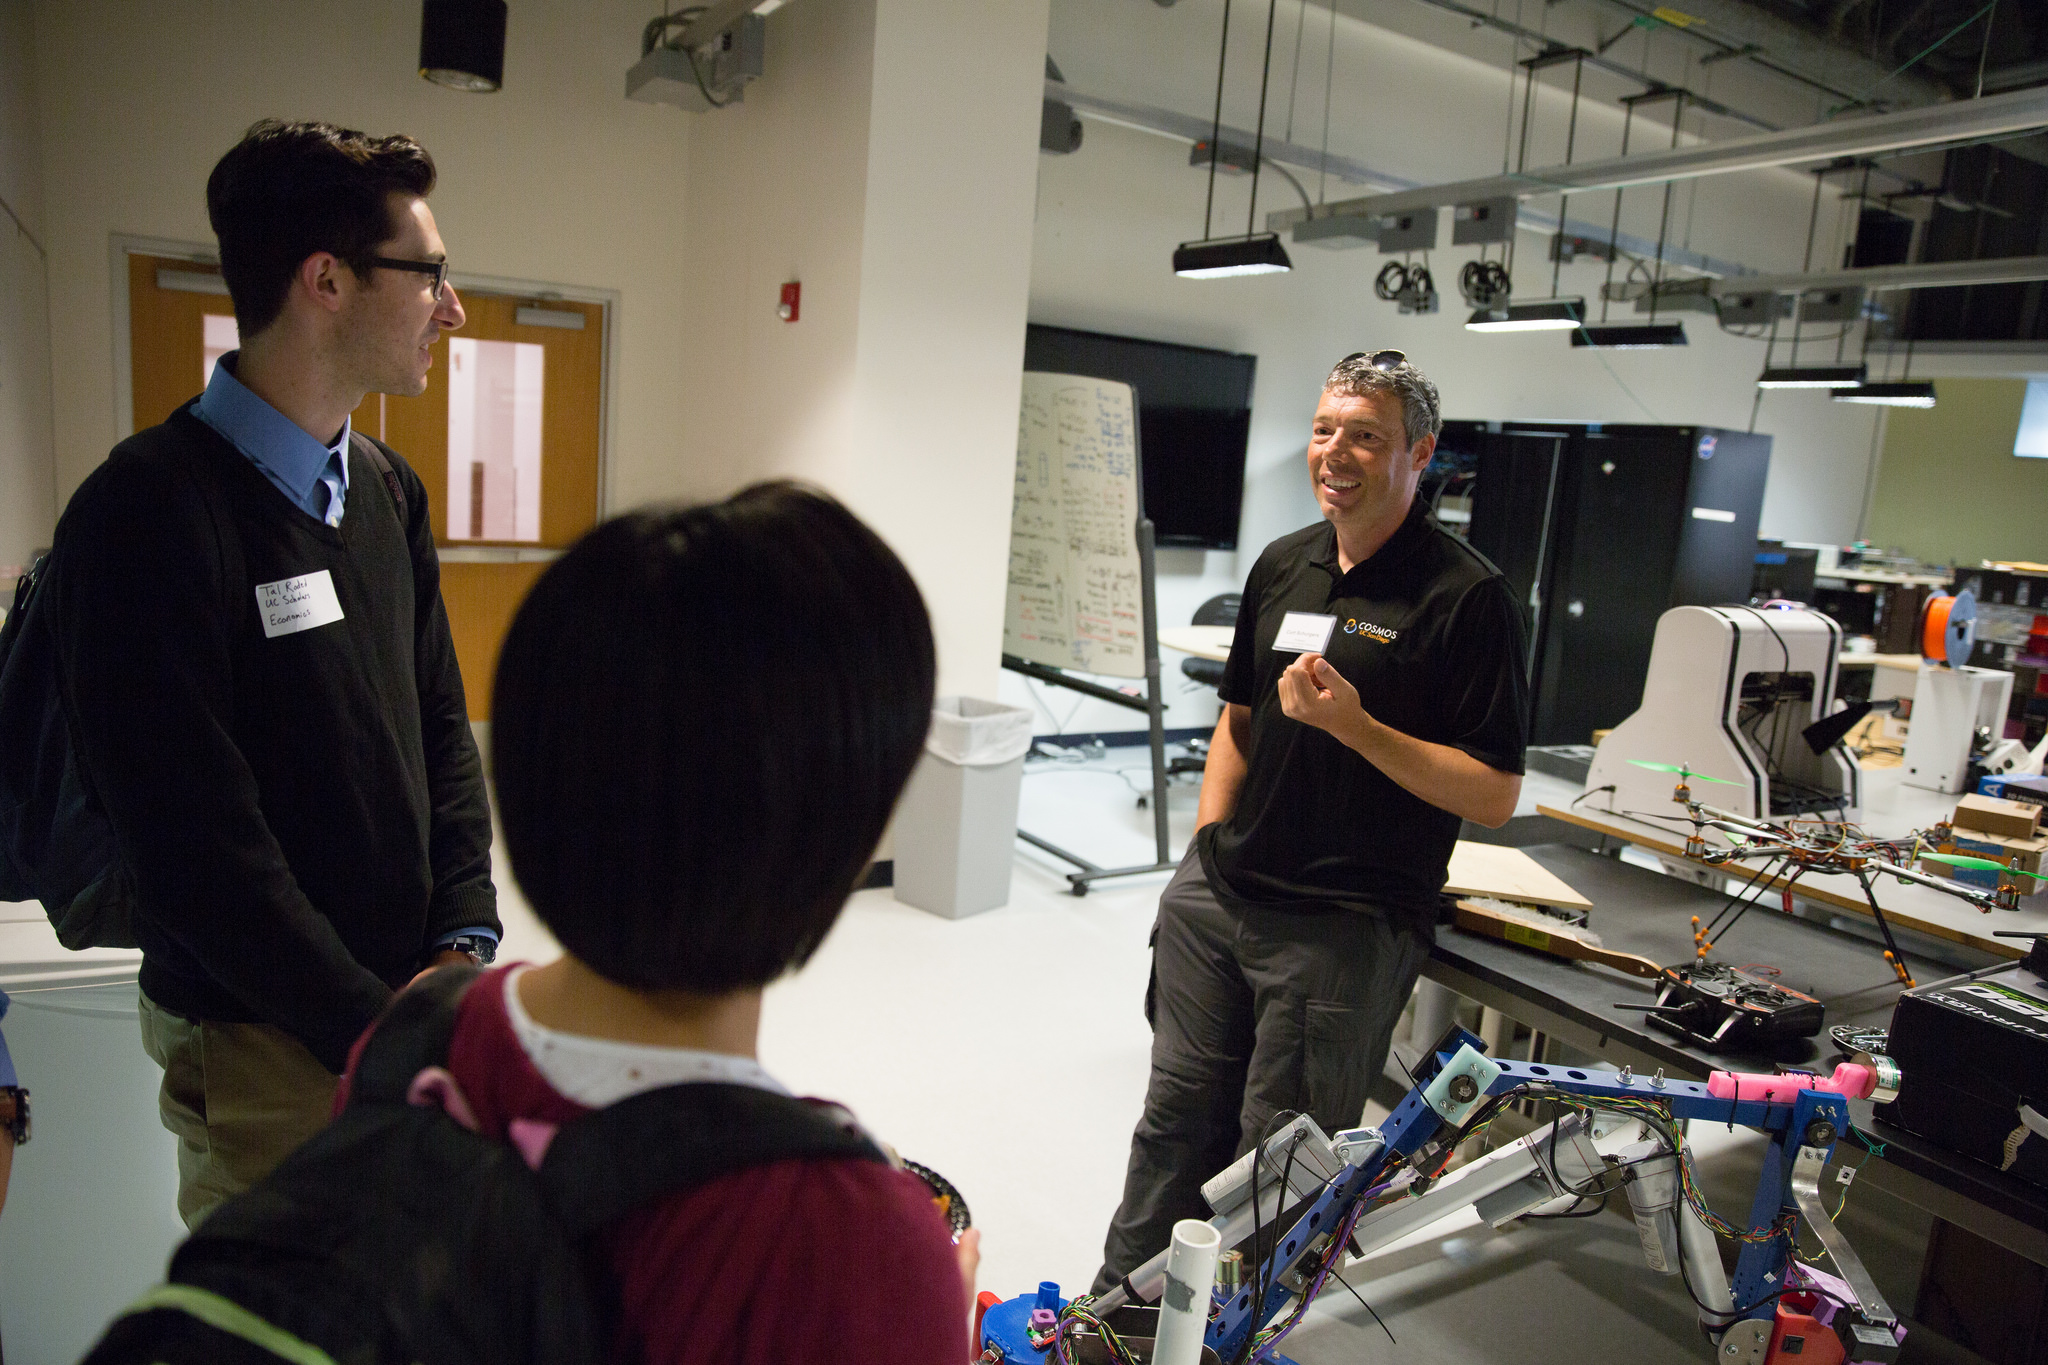 Curt Schurgers answers questions from students during a tour of the QI Prototyping Lab